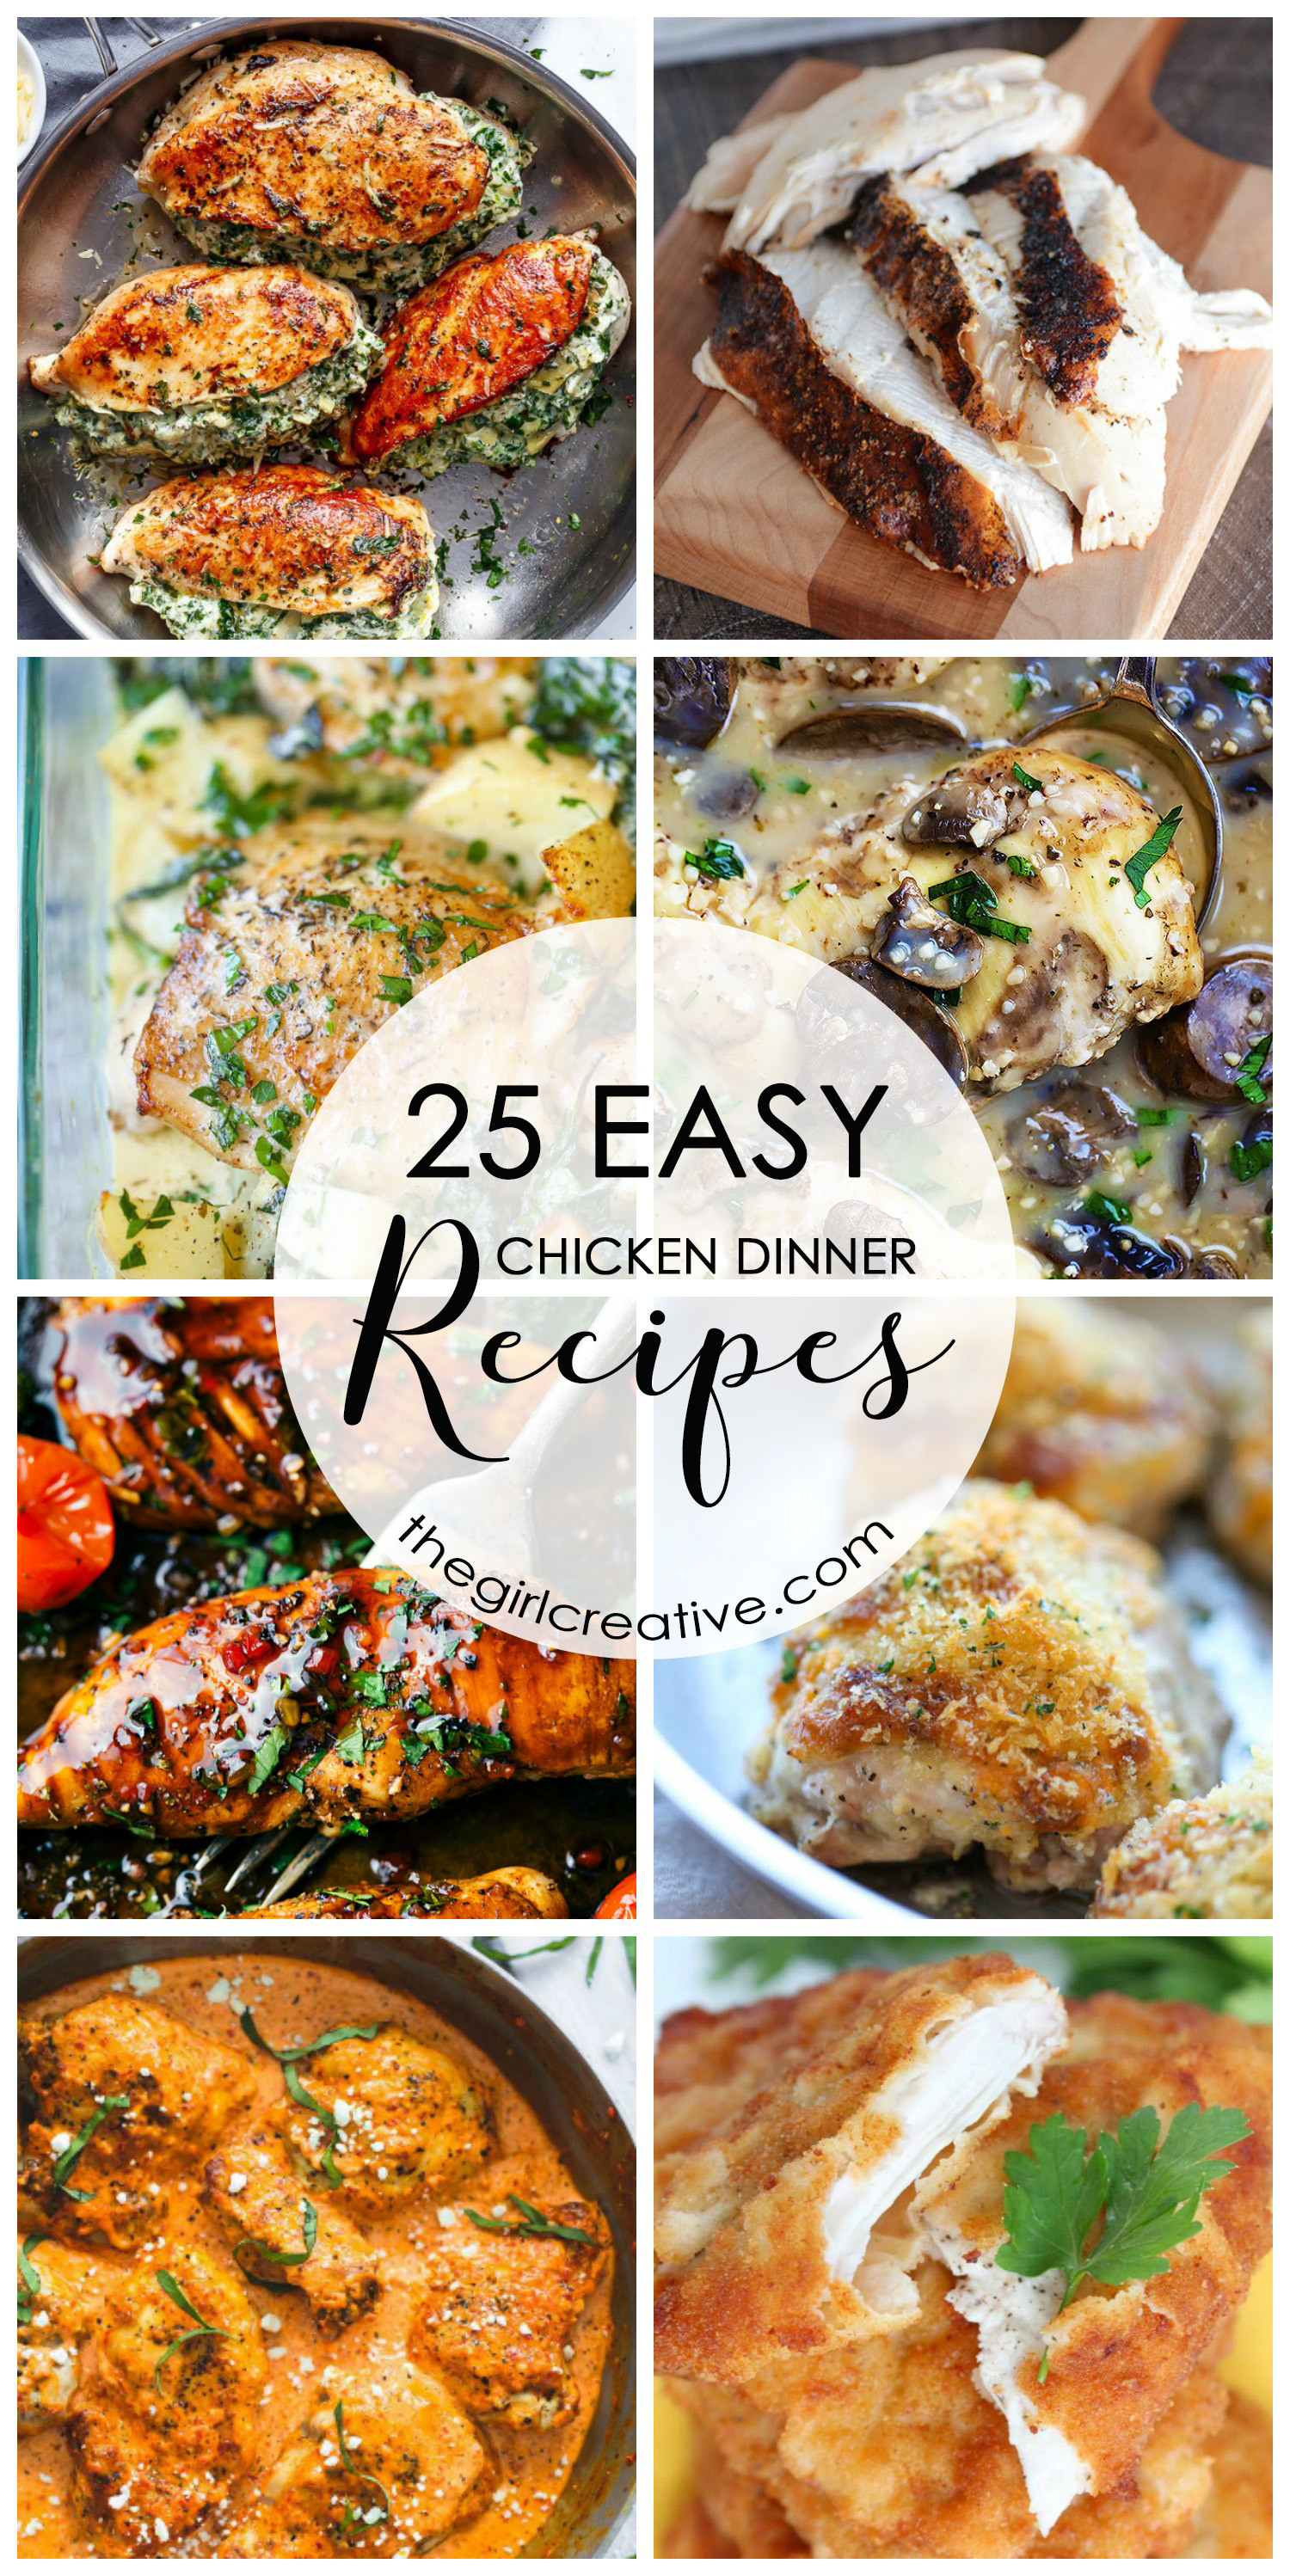 Quick Recipes For Dinner
 25 Easy Chicken Dinner Recipes The Girl Creative